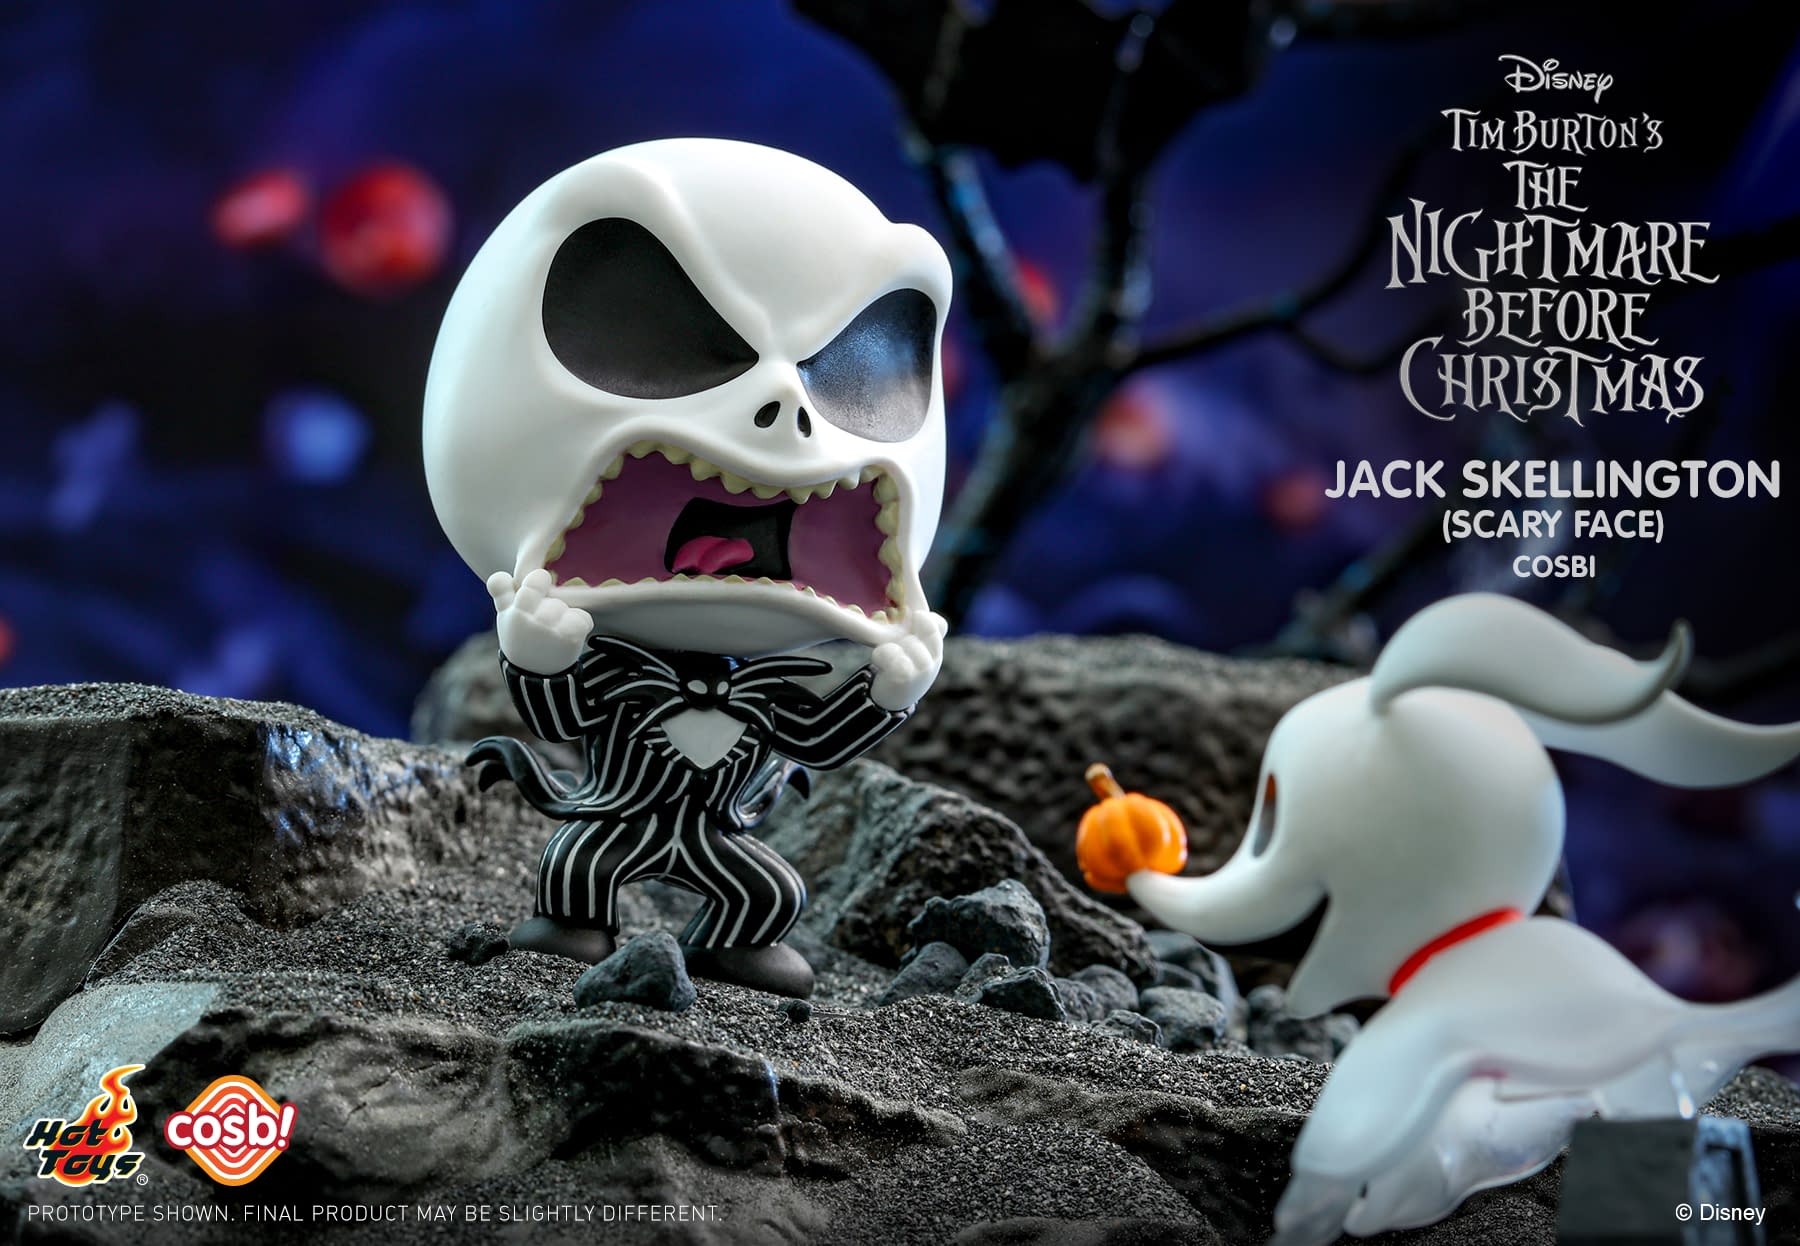 Halloween Awaits with The Nightmare Before Christmas Cosbi Collection